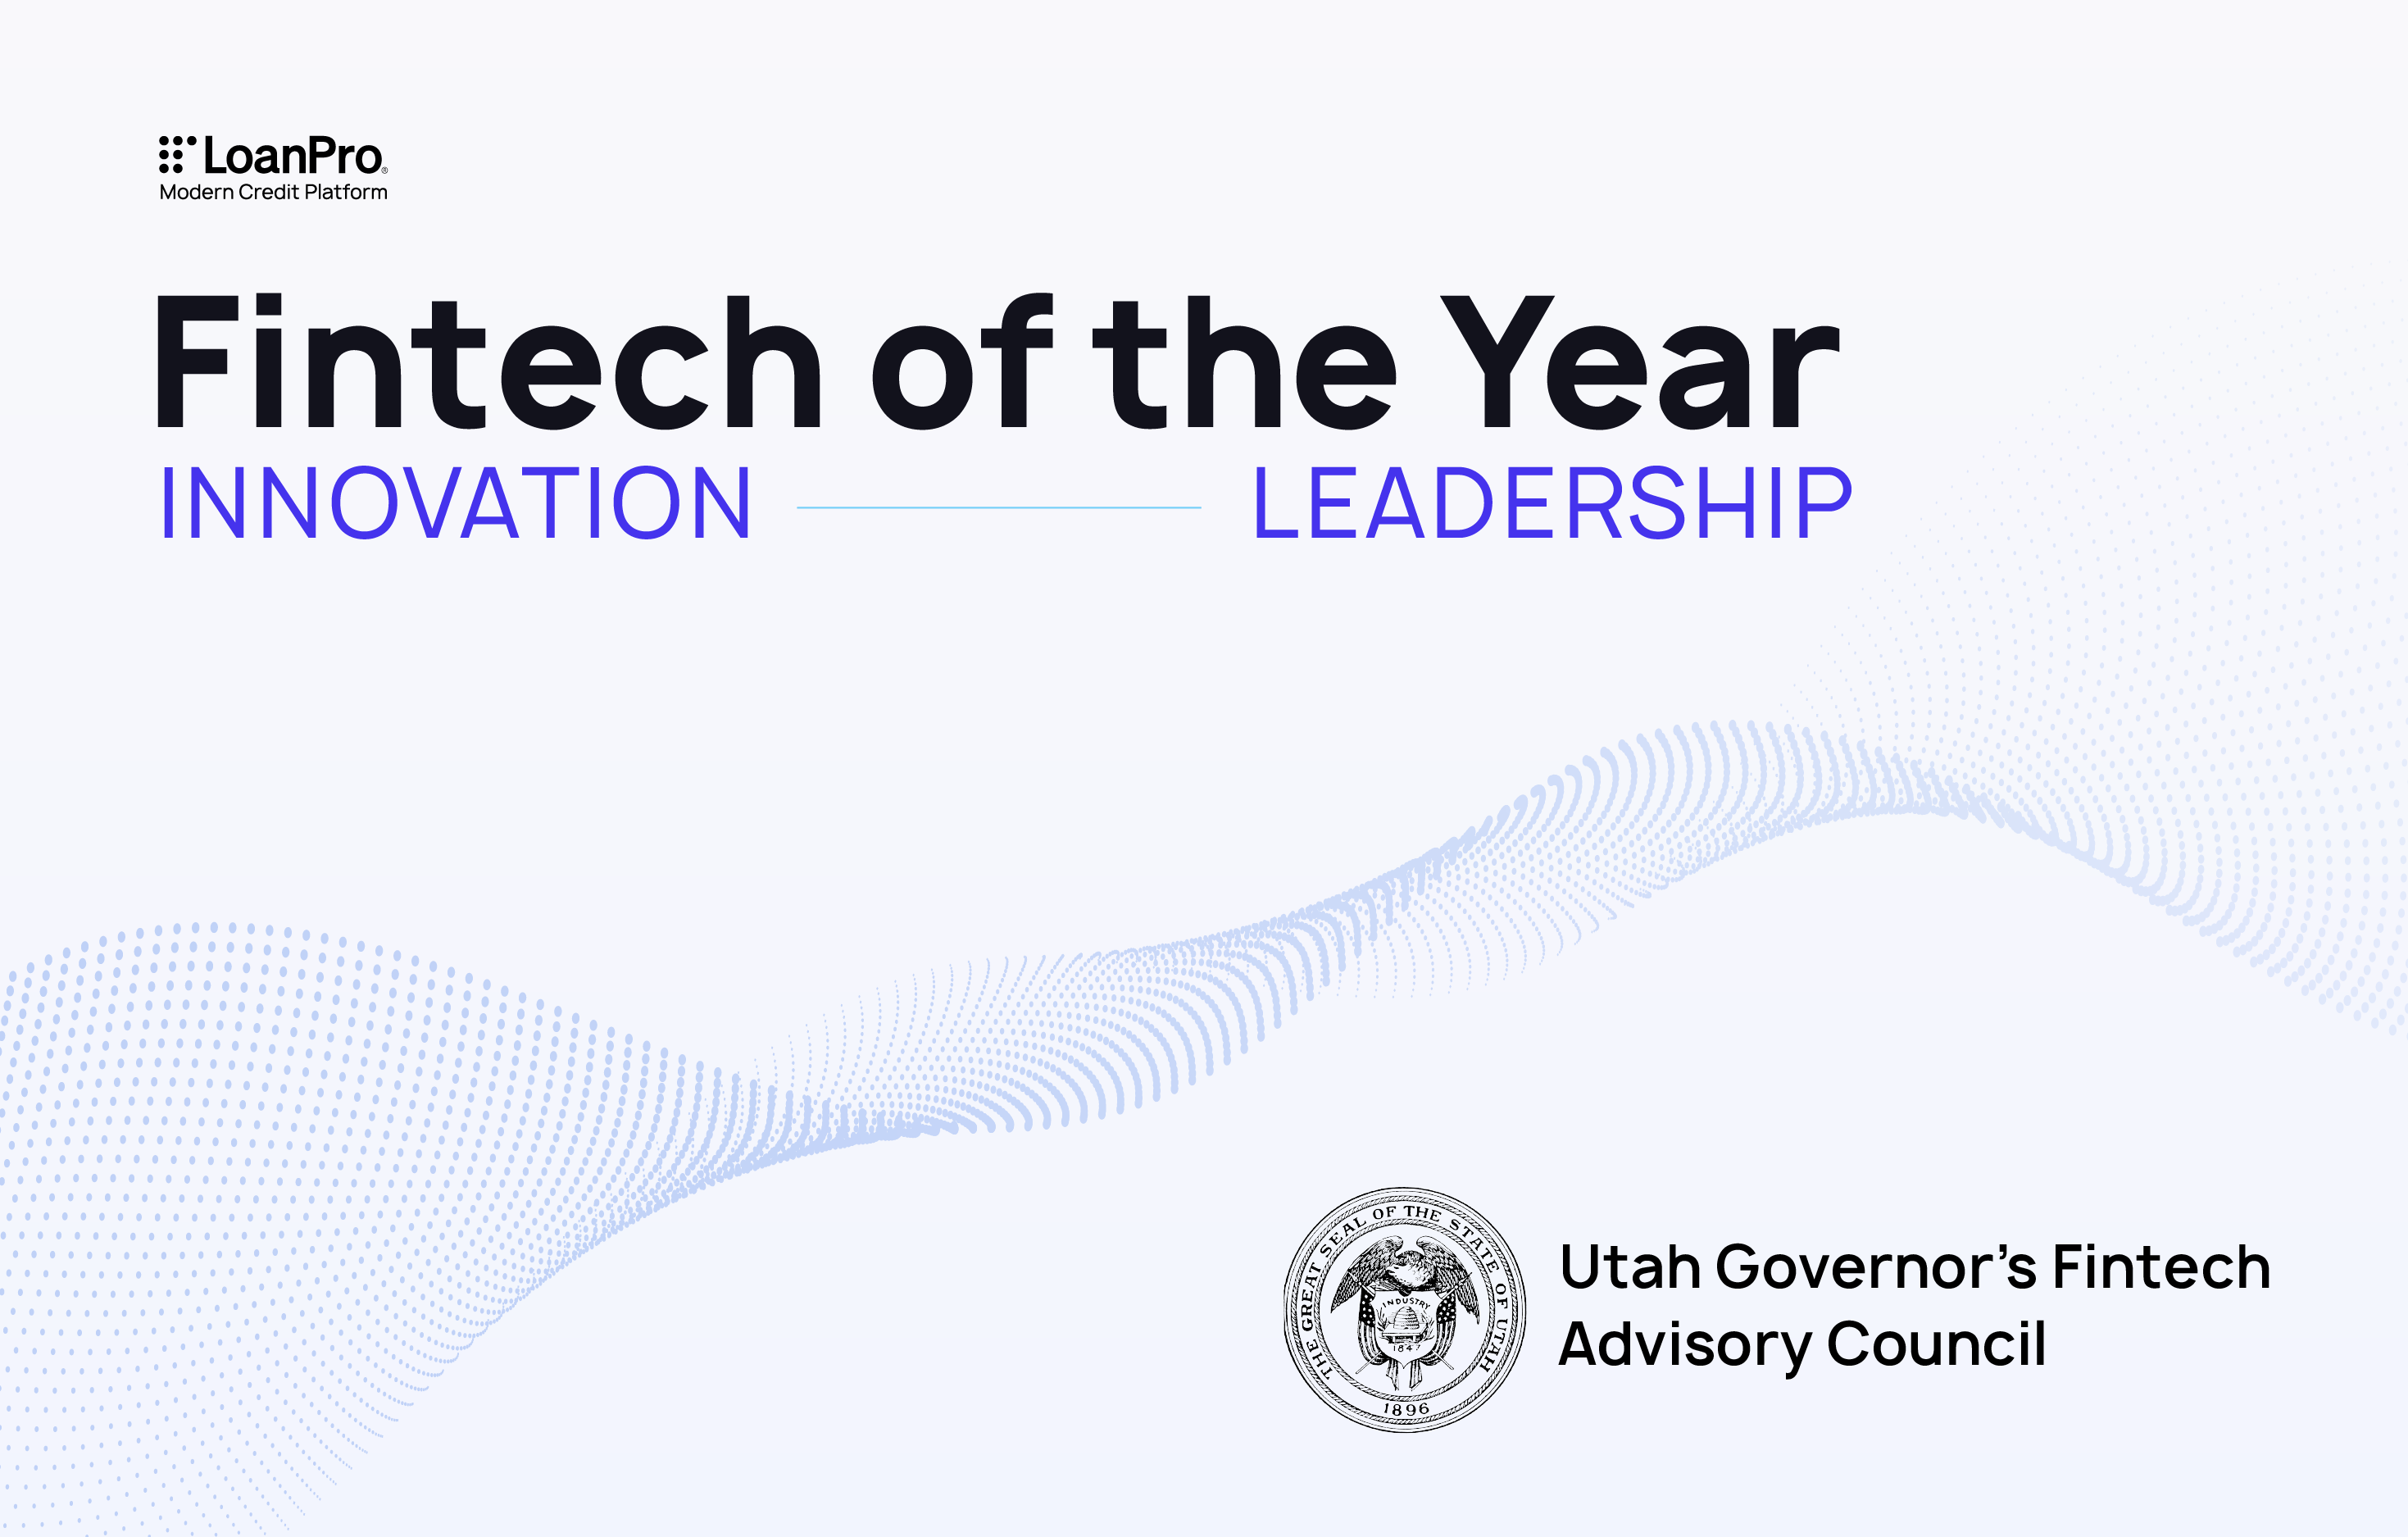 LoanPro awarded Utah’s “Fintech of the Year” award for innovation and leadership